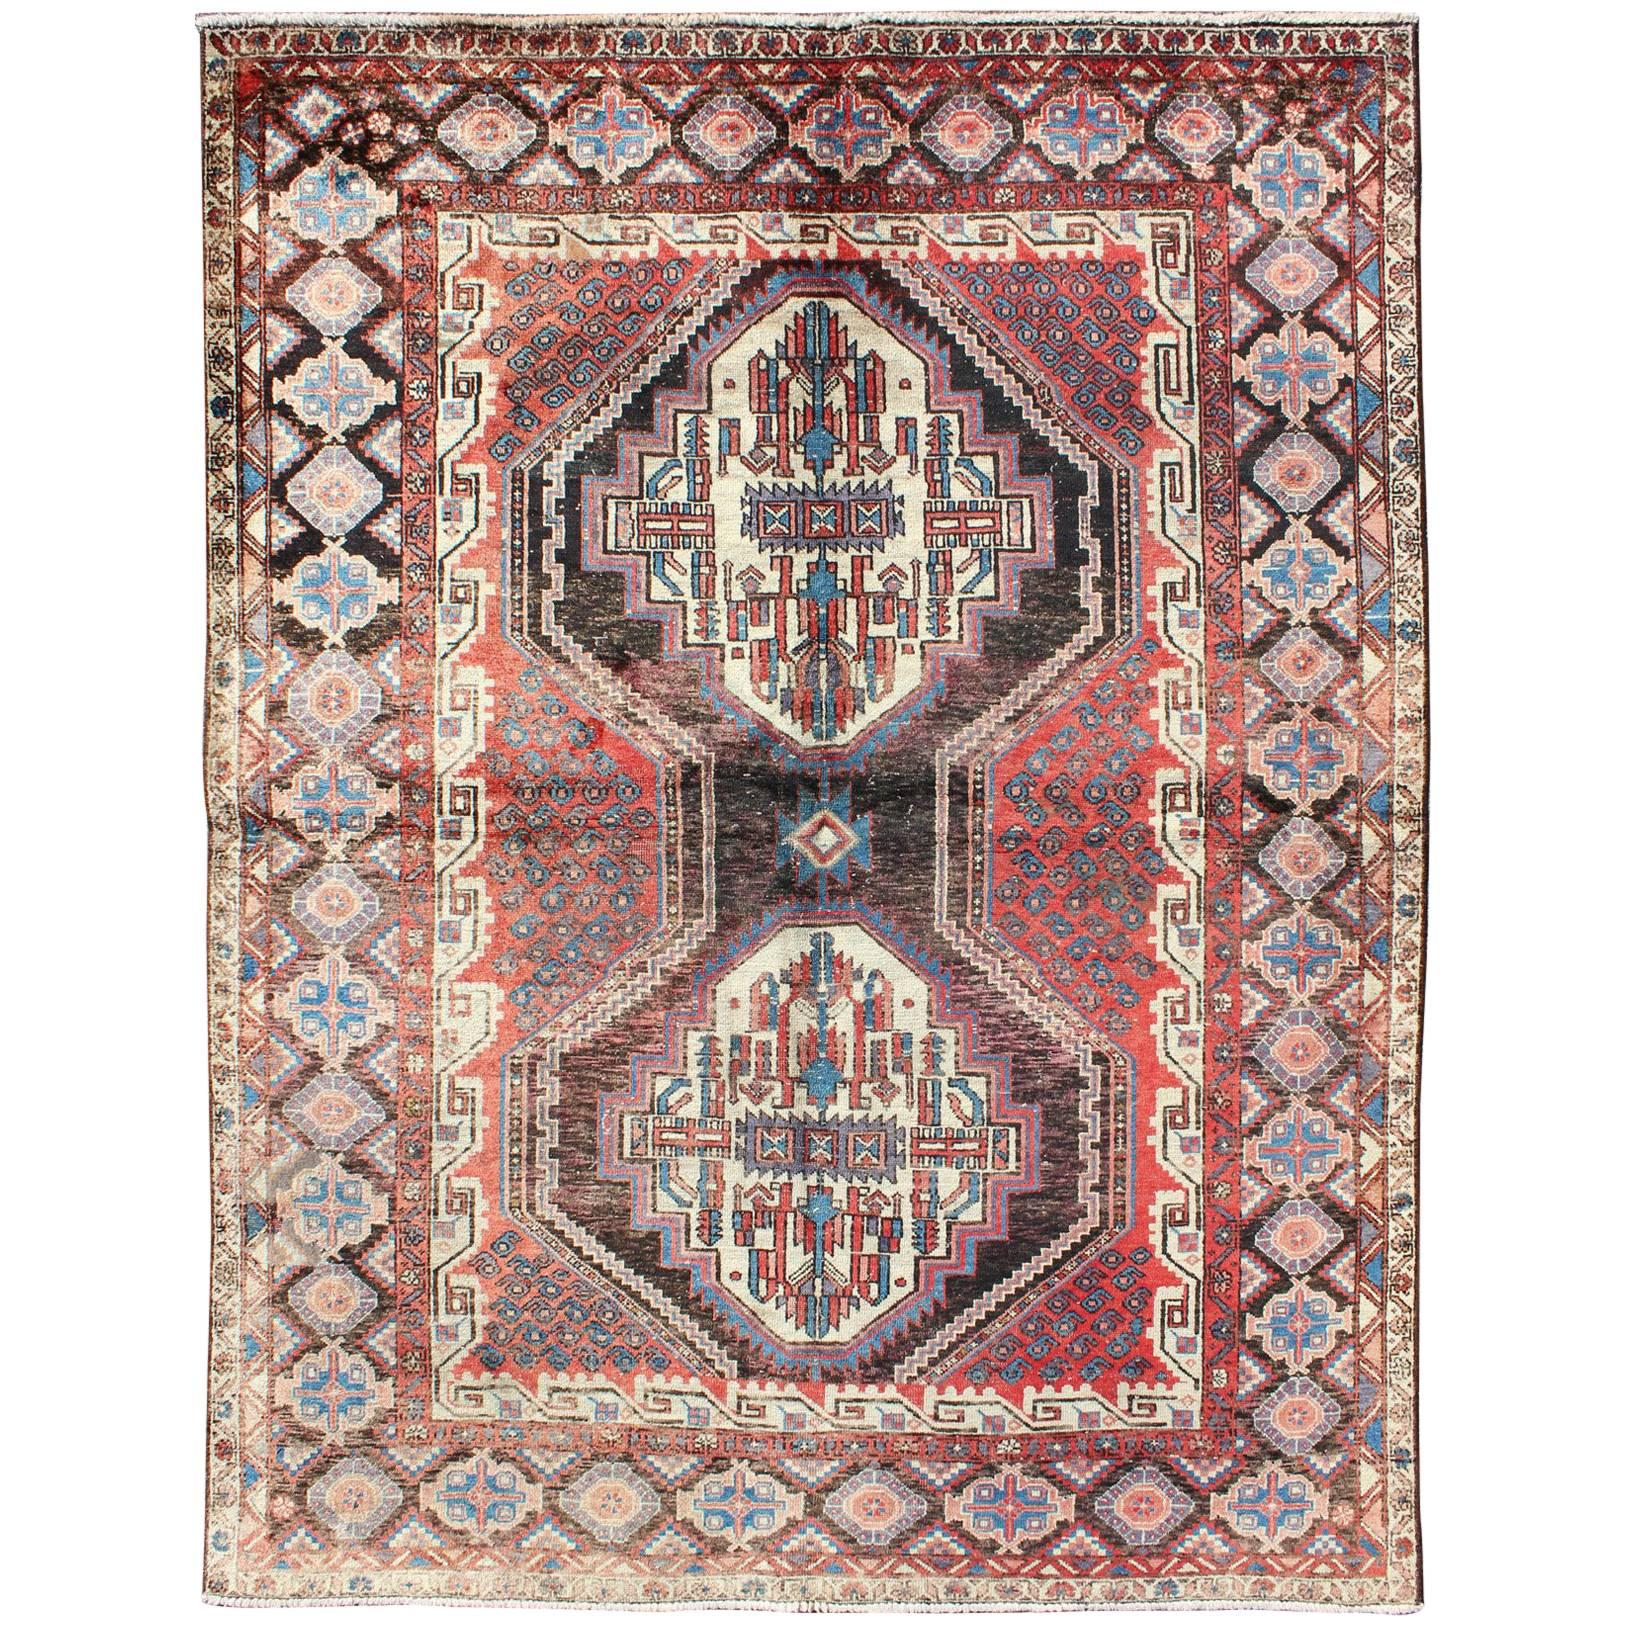 Dual Medallion Vintage Persian Seejan Rug in Red, Charcoal, Blue, and Brown